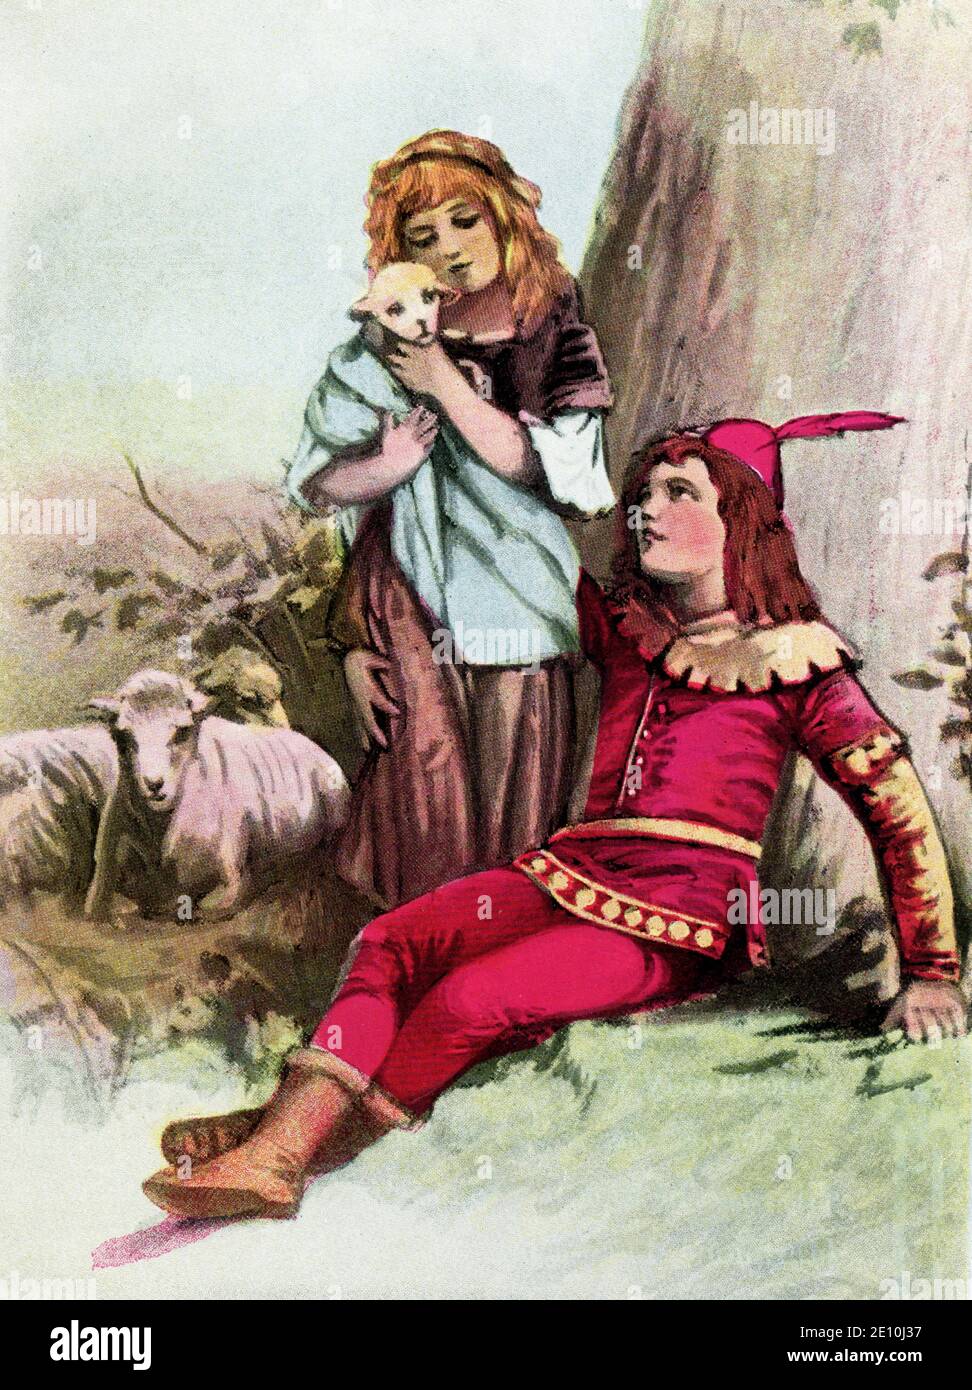 Prince Florizel and Perdita - A Winter’s Tale by Shakespeare. Florizel is the son of Polixenes – King of Bohemia. He falls in love with Perdita, and wishes to marry her. The jealous King Leontes falsely accuse his wife Hermione of infidelity with his best friend, and she dies. Leontes exiles his newborn daughter Perdita, who is raised by shepherds for sixteen years and falls in love with Florizel, the son of Leontes' friend. When Perdita returns home, a statue of Hermione 'comes to life', and everyone is reconciled. William Shakespeare (1564-1616) was an English playwright, poet, and actor, wi Stock Photo